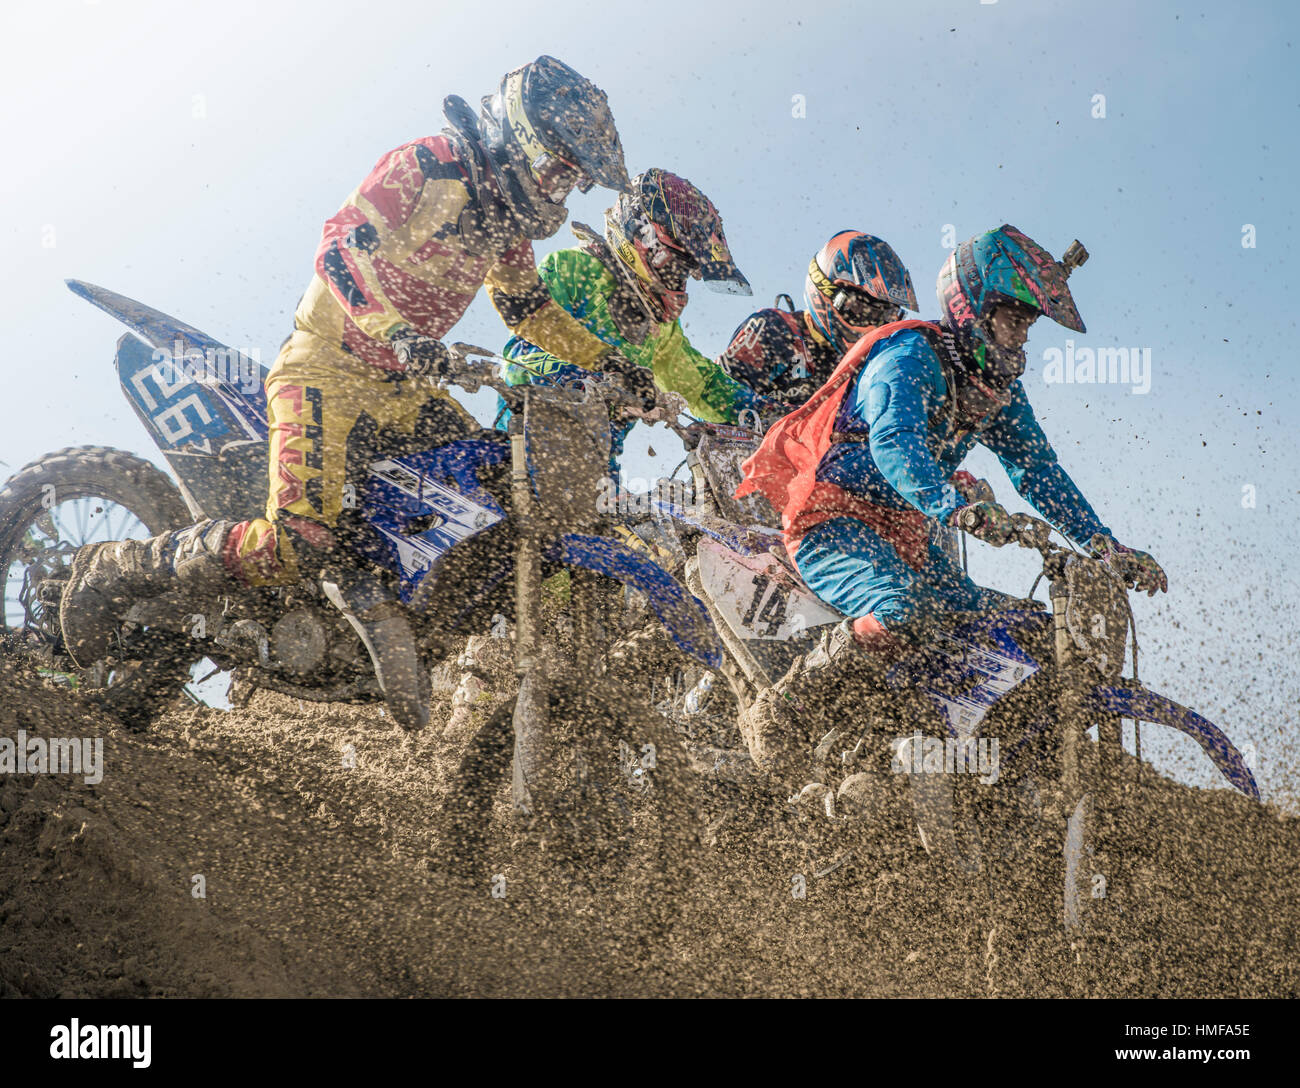 Motorcycle riders competing in a beach race Stock Photo